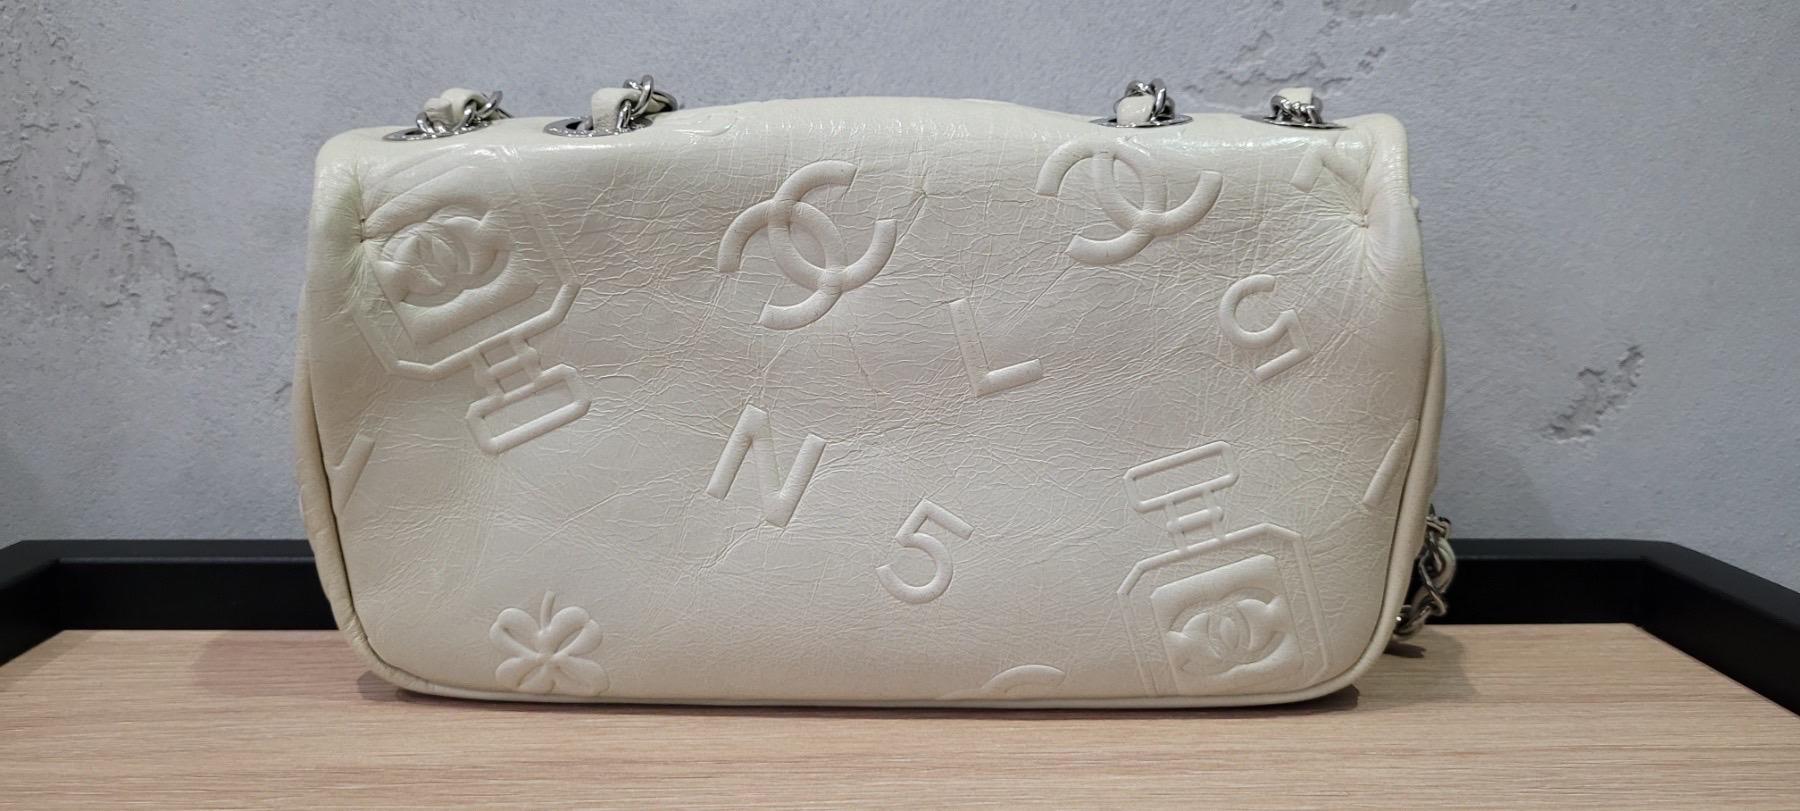 Women's Chanel White Embossed Leather Precious Symbols Small Flap Bag For Sale